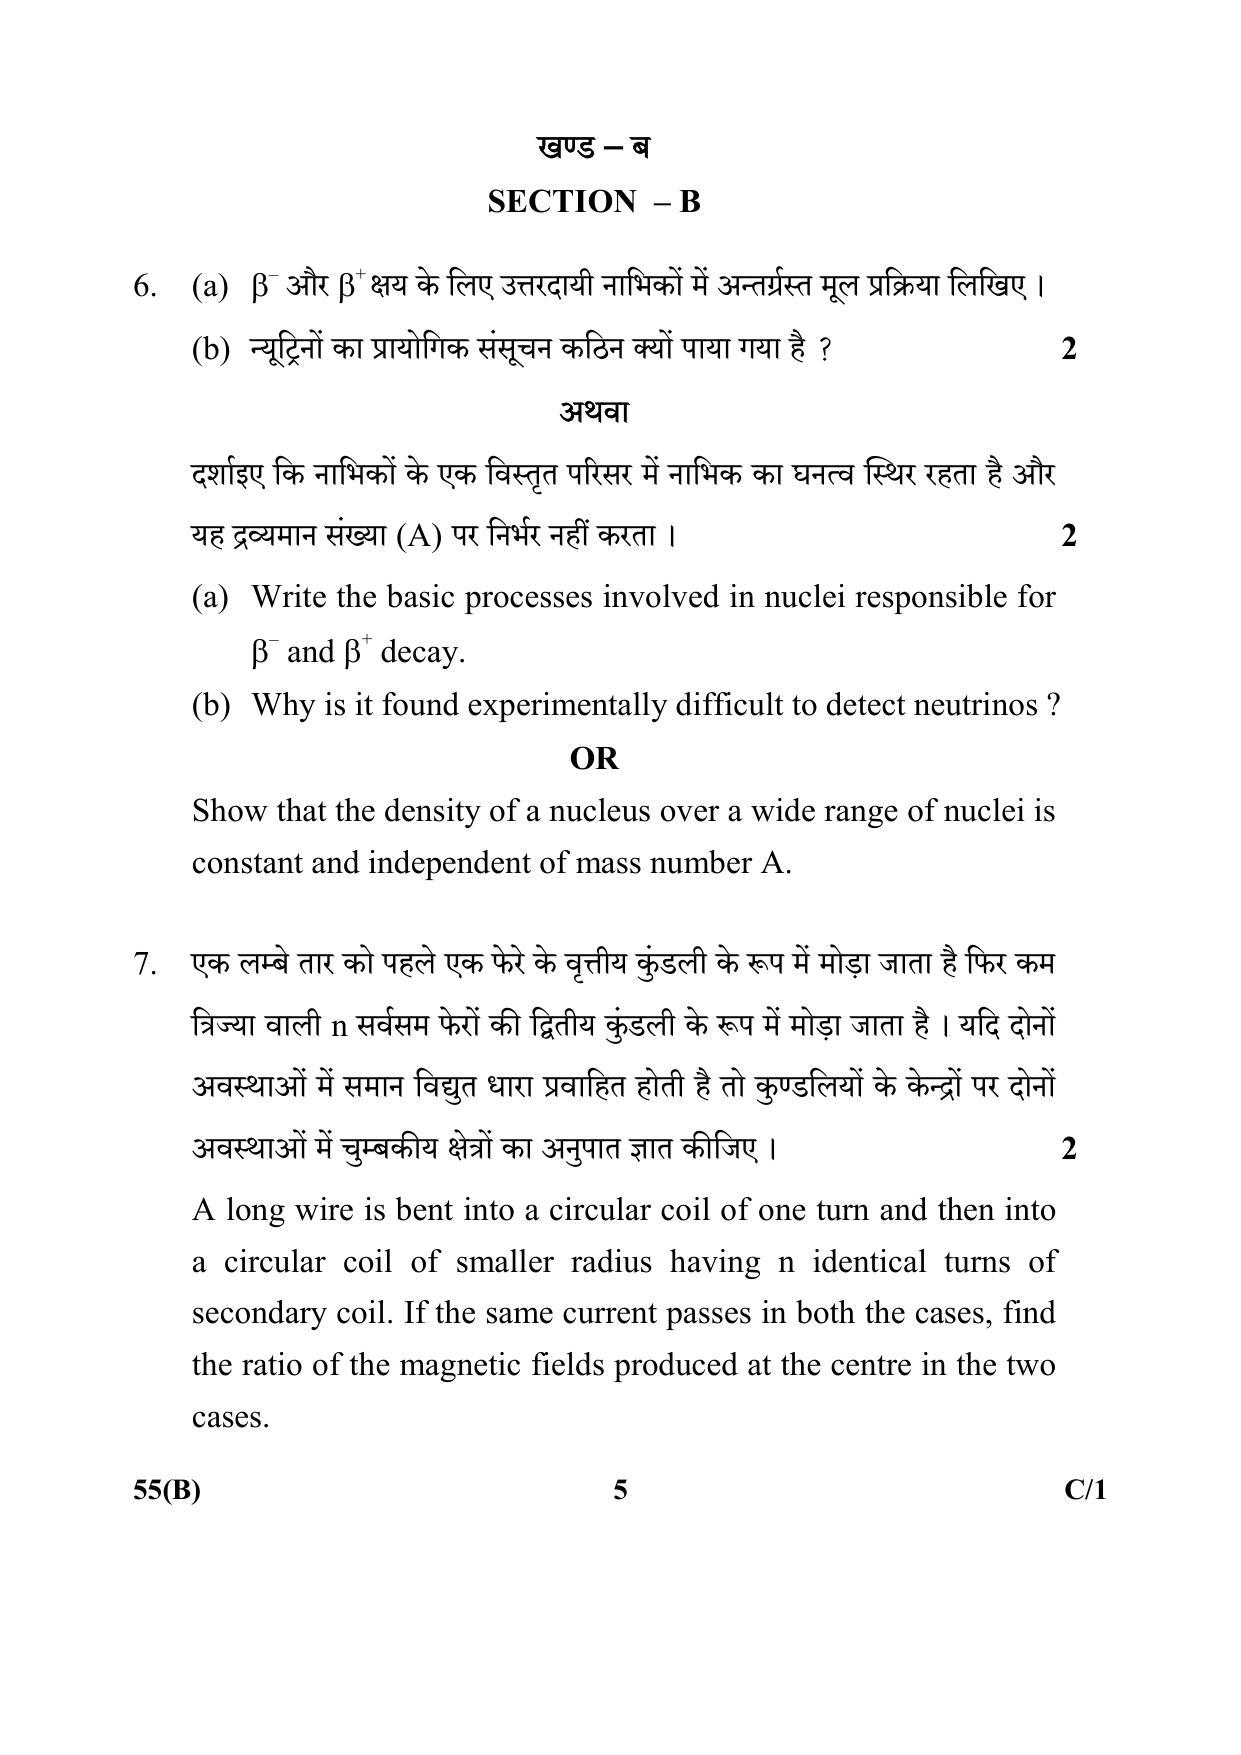 CBSE Class 12 55(B) (Physics) 2018 Compartment Question Paper - Page 5